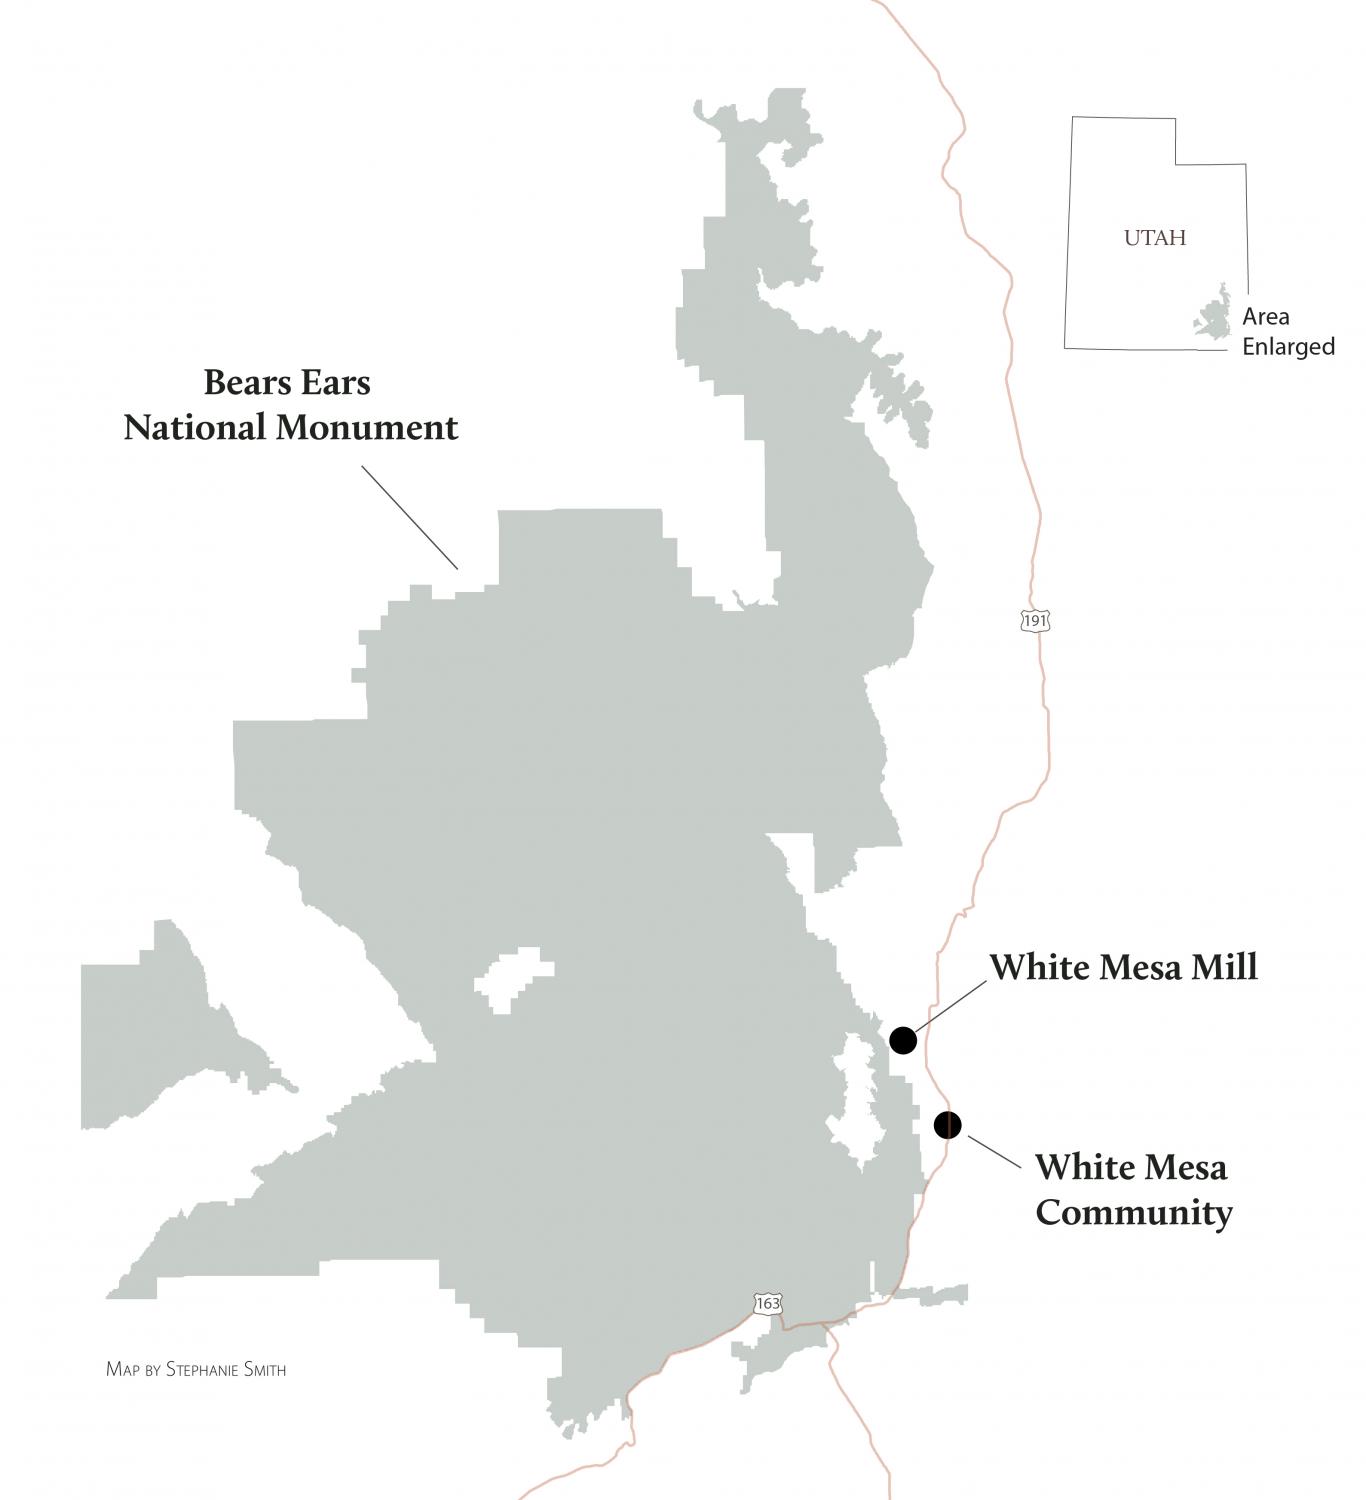 Bears Ears and White Mesa Mill map